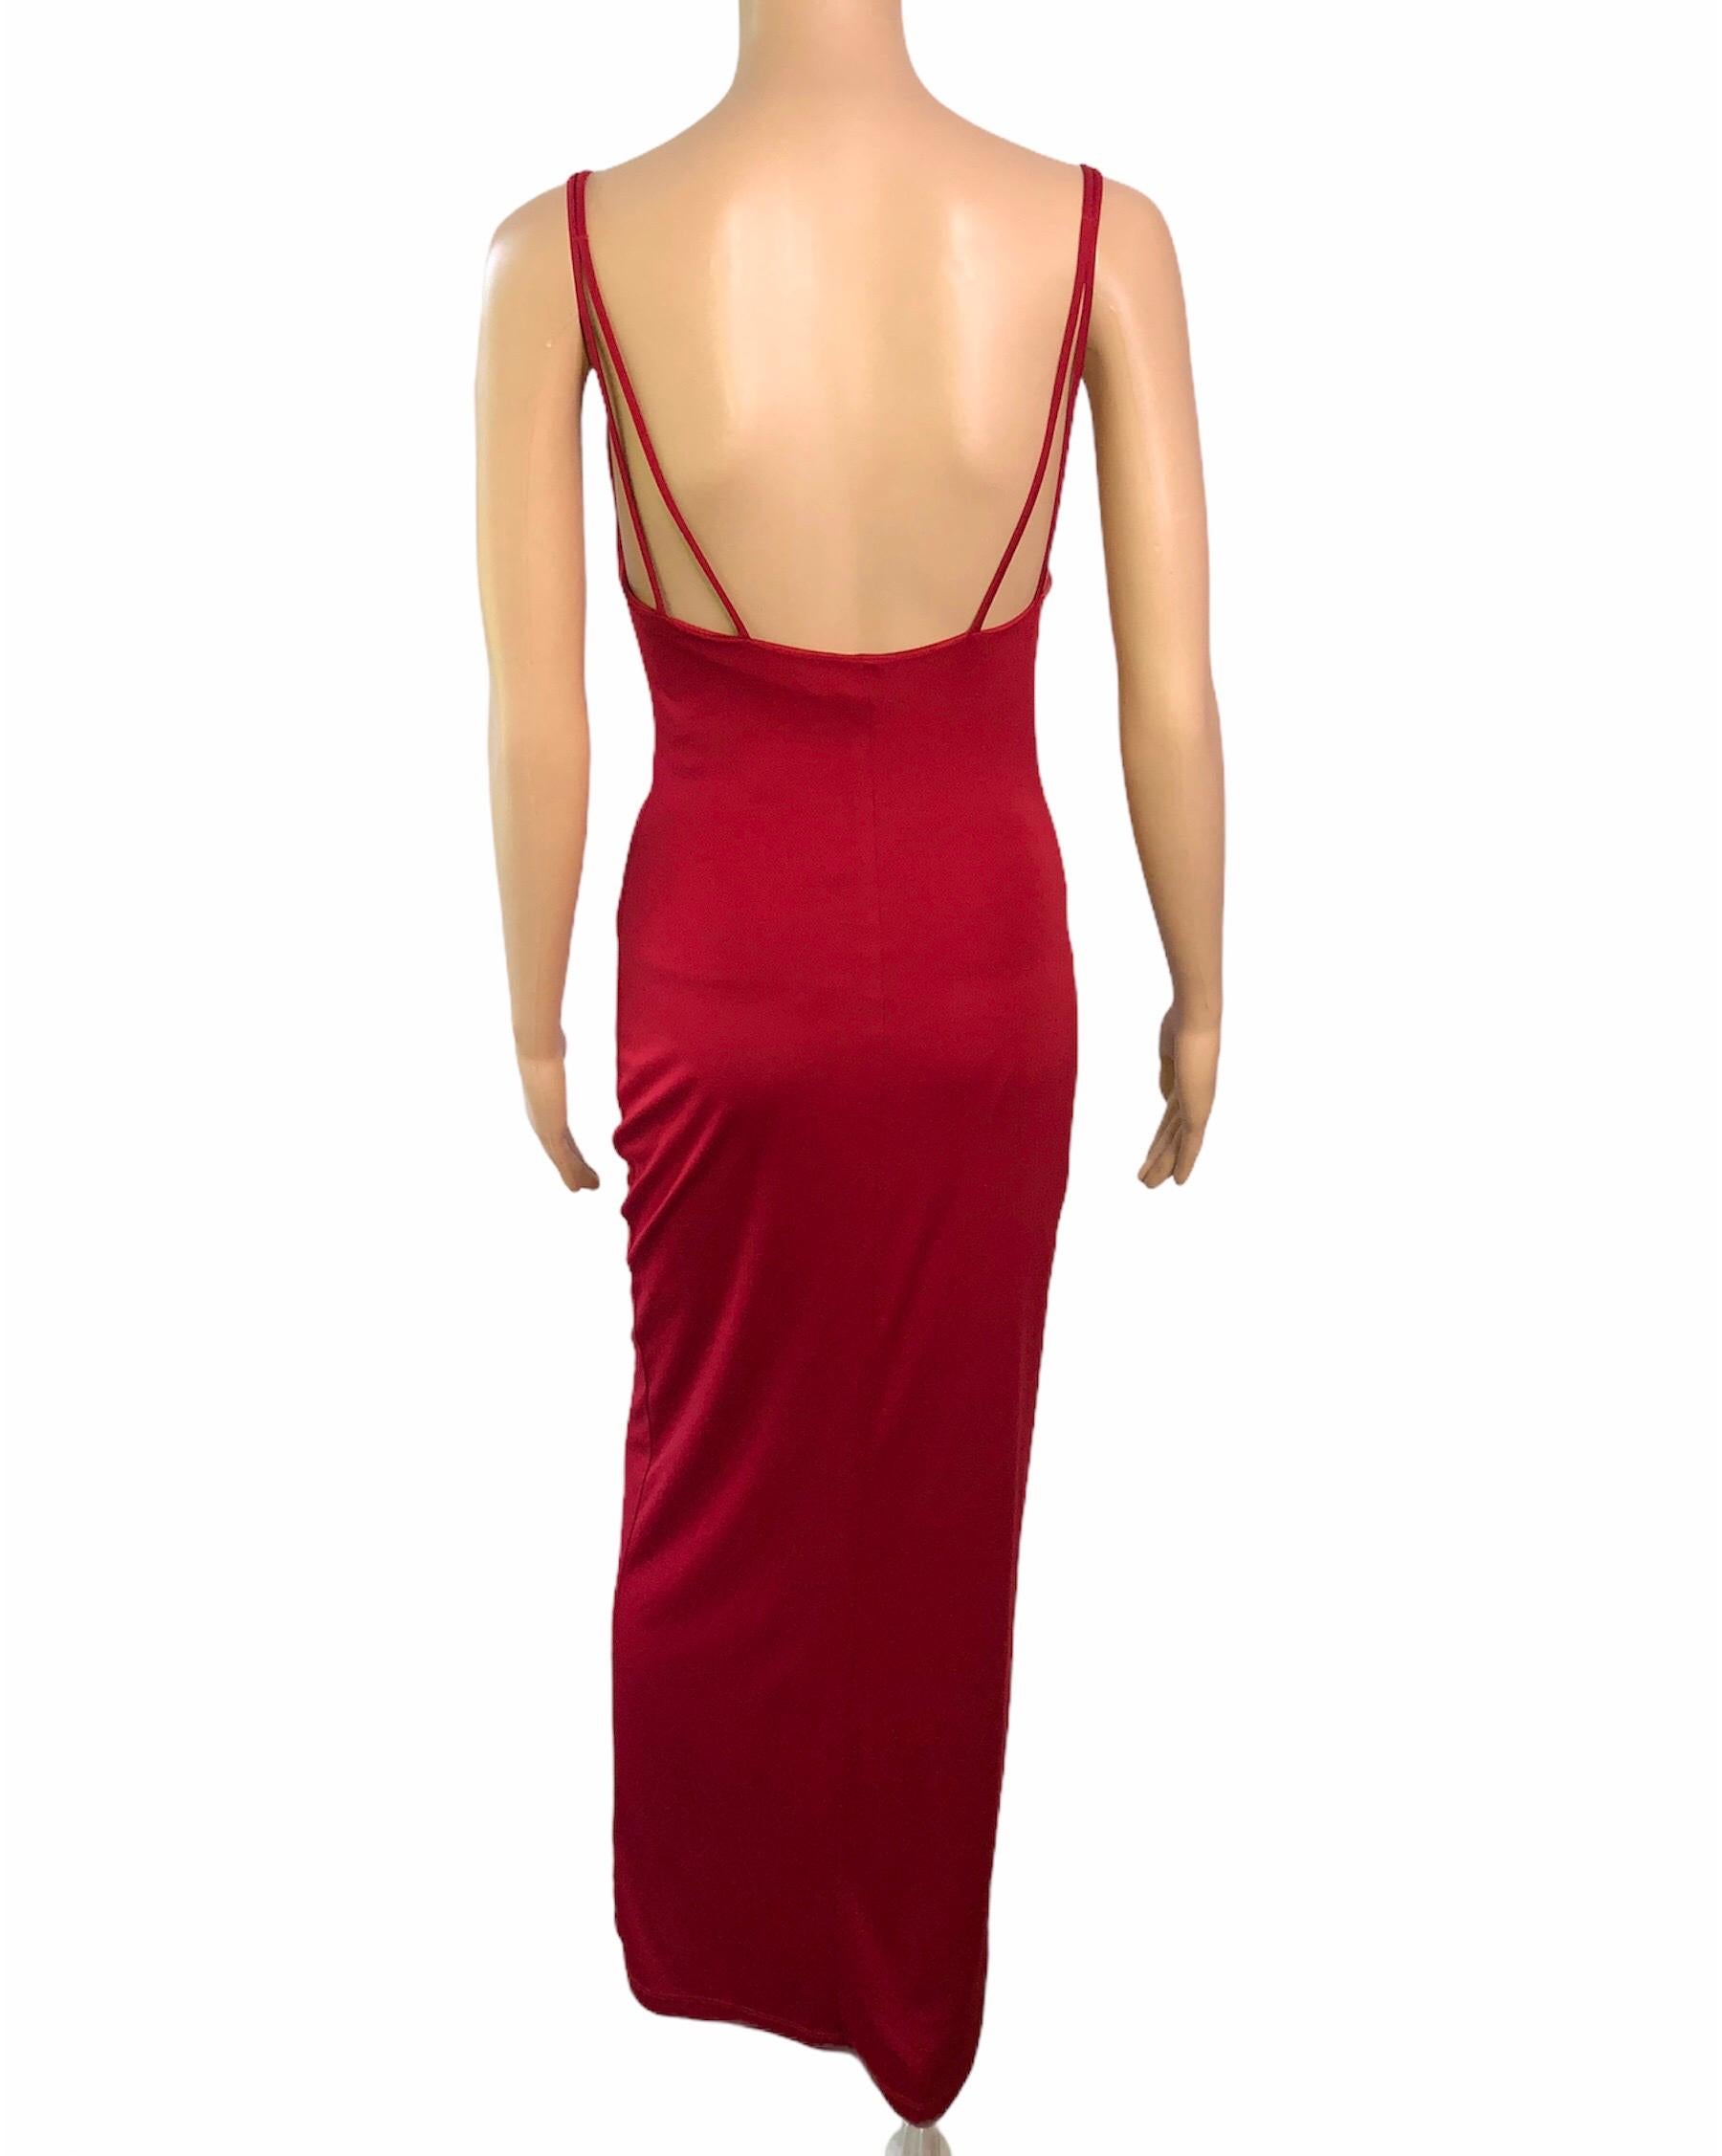 Gianni Versace 1990's Vintage Embellished Sheer Panel Red Evening Dress Gown For Sale 1